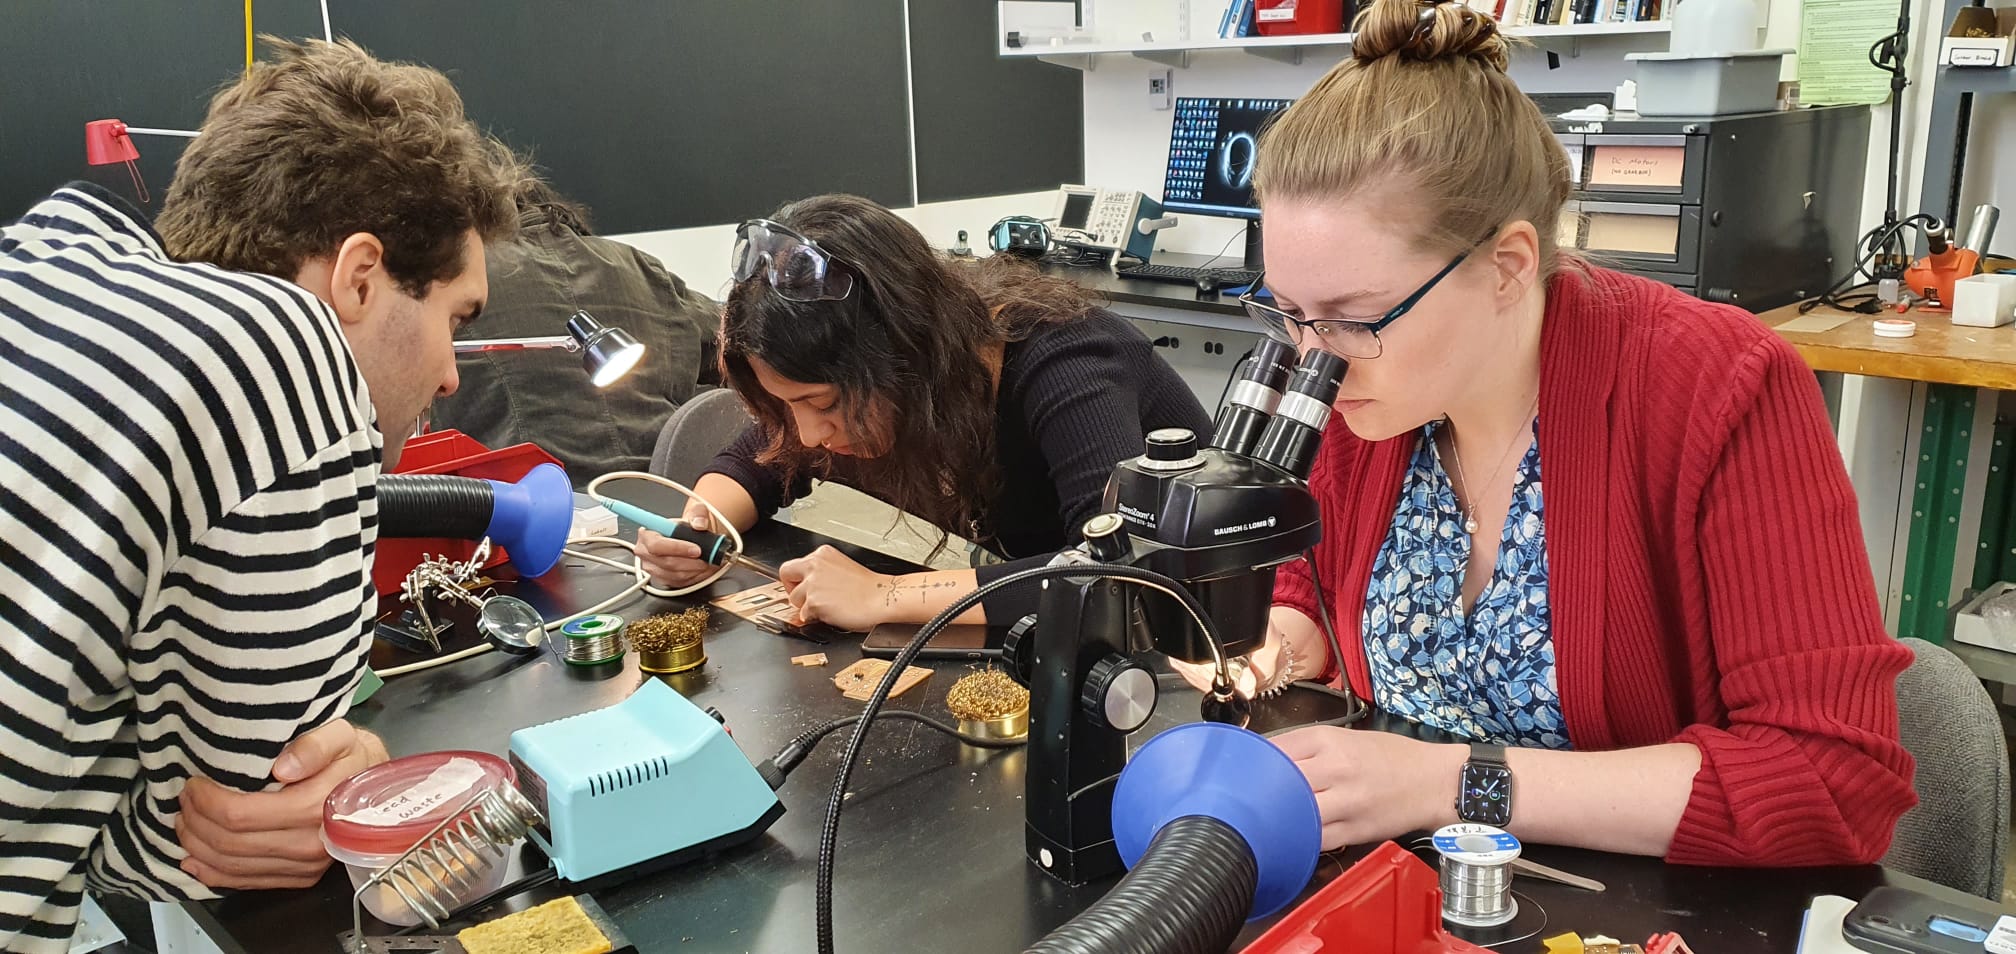 Image of a group of people soldering on a table